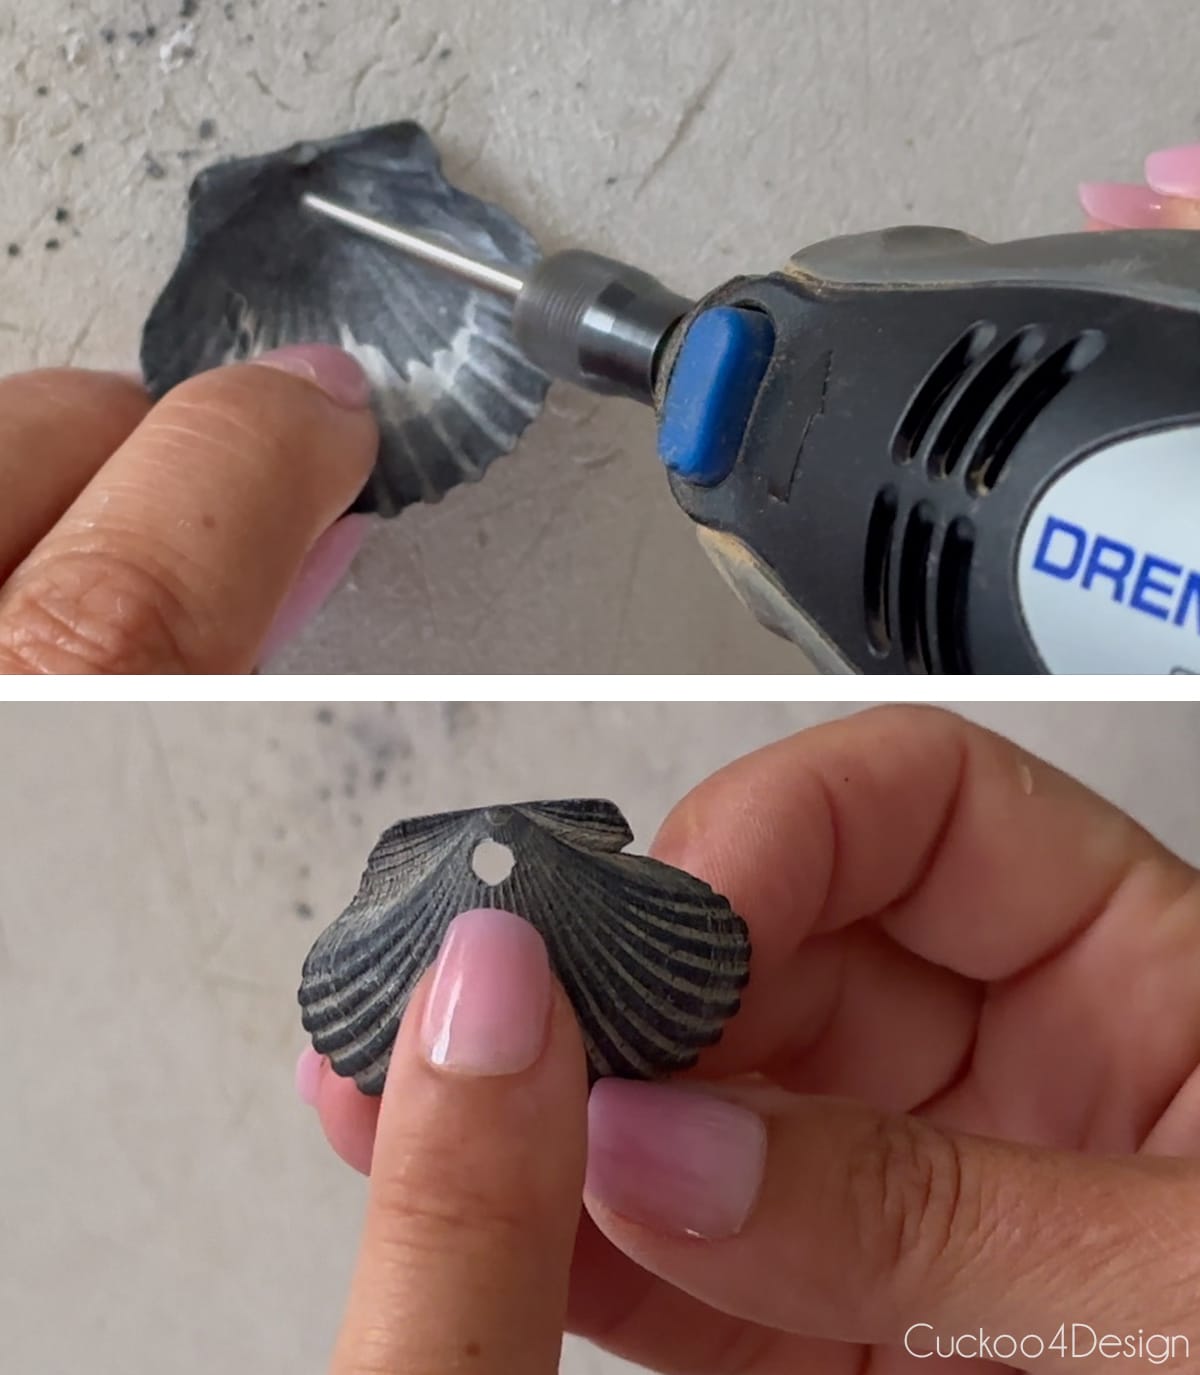 drilling holes into the top of a seashell with a Dremel